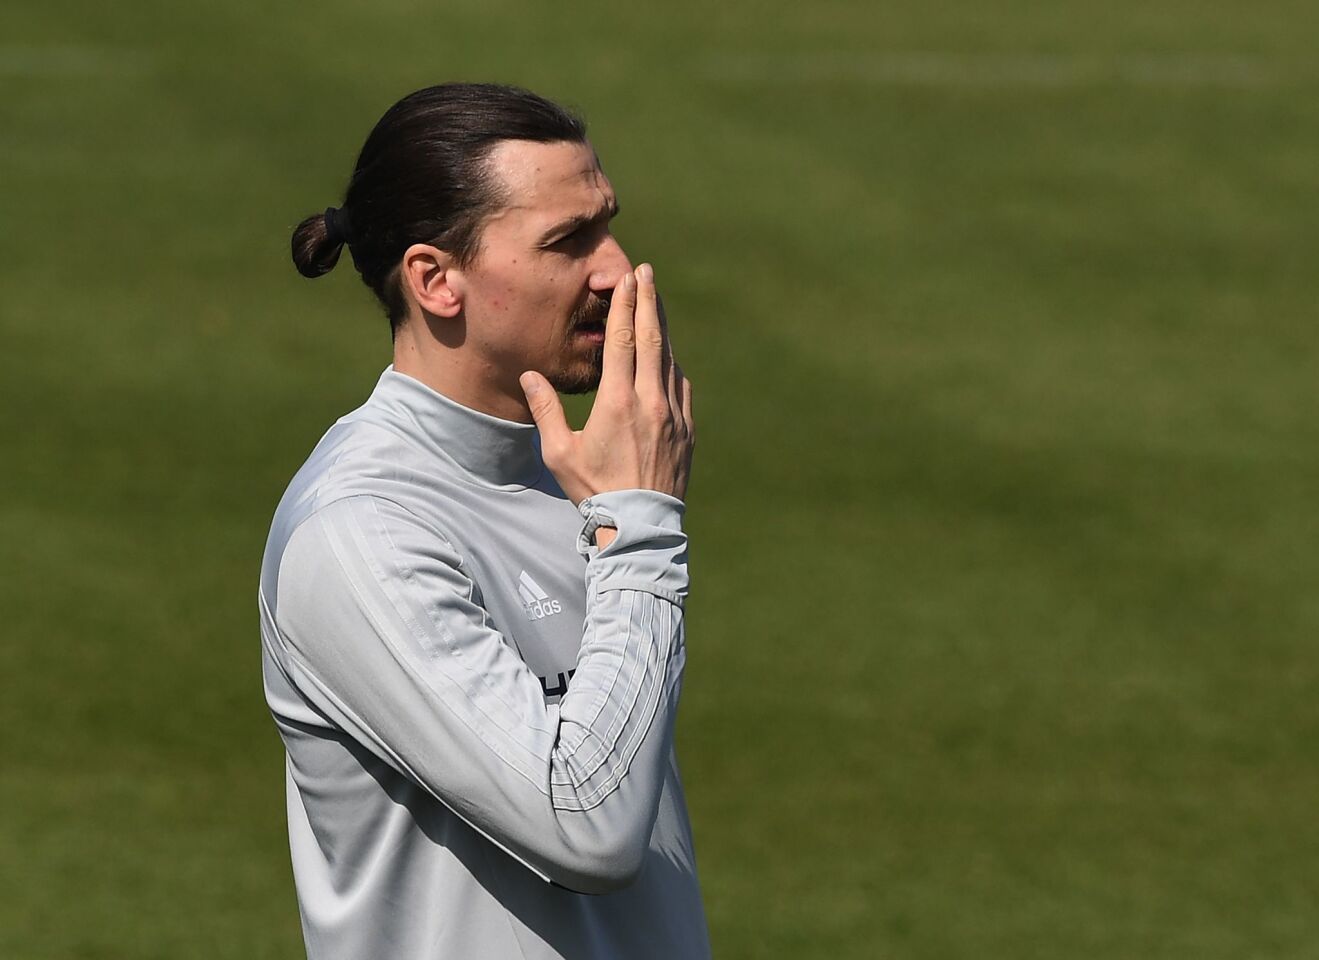 Football star Zlatan Ibrahimovic watches his new teammates during his first training session at his new club LA Galaxy in Los Angeles, California, on March 30, 2018. The 36-year-old Swedish striker's move to MLS from Manchester United was confirmed last week, with Ibrahimovic swiftly vowing to reignite the Galaxy's fortunes after they finished bottom of the league last season. / AFP PHOTO / Mark RALSTONMARK RALSTON/AFP/Getty Images ** OUTS - ELSENT, FPG, CM - OUTS * NM, PH, VA if sourced by CT, LA or MoD **